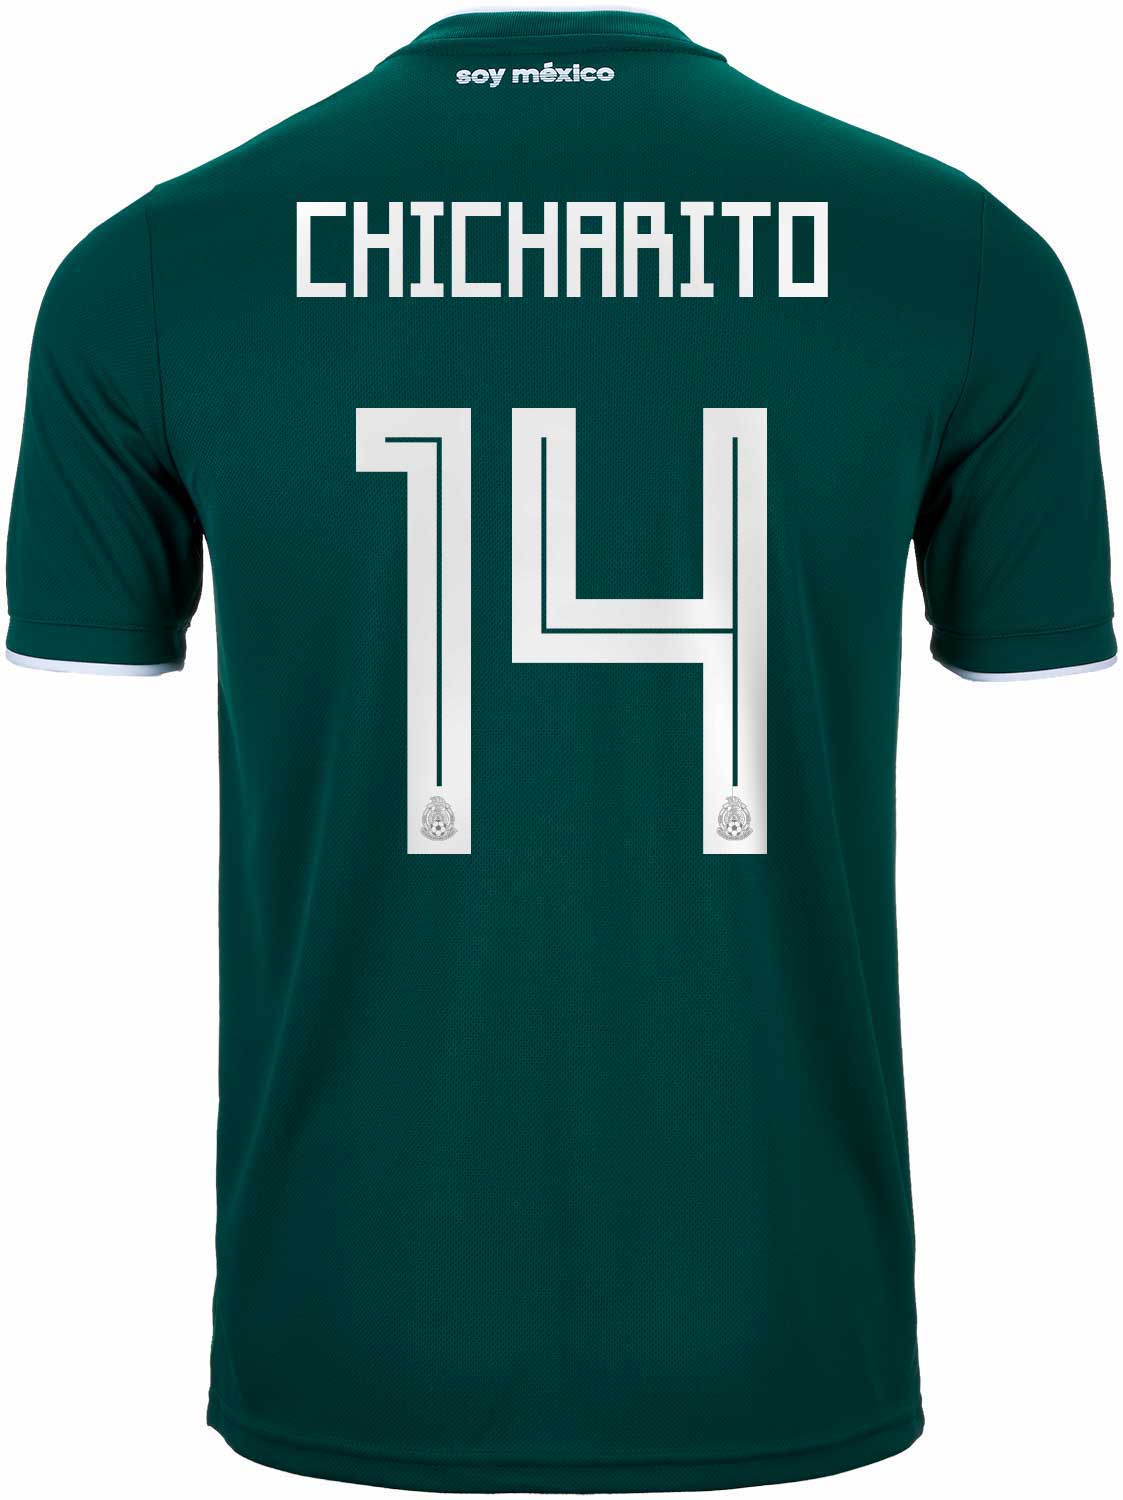 Youth New!! 5-6 YEARS Mexico Green CHICHARITO #14 Set 2018 Home Kids M 